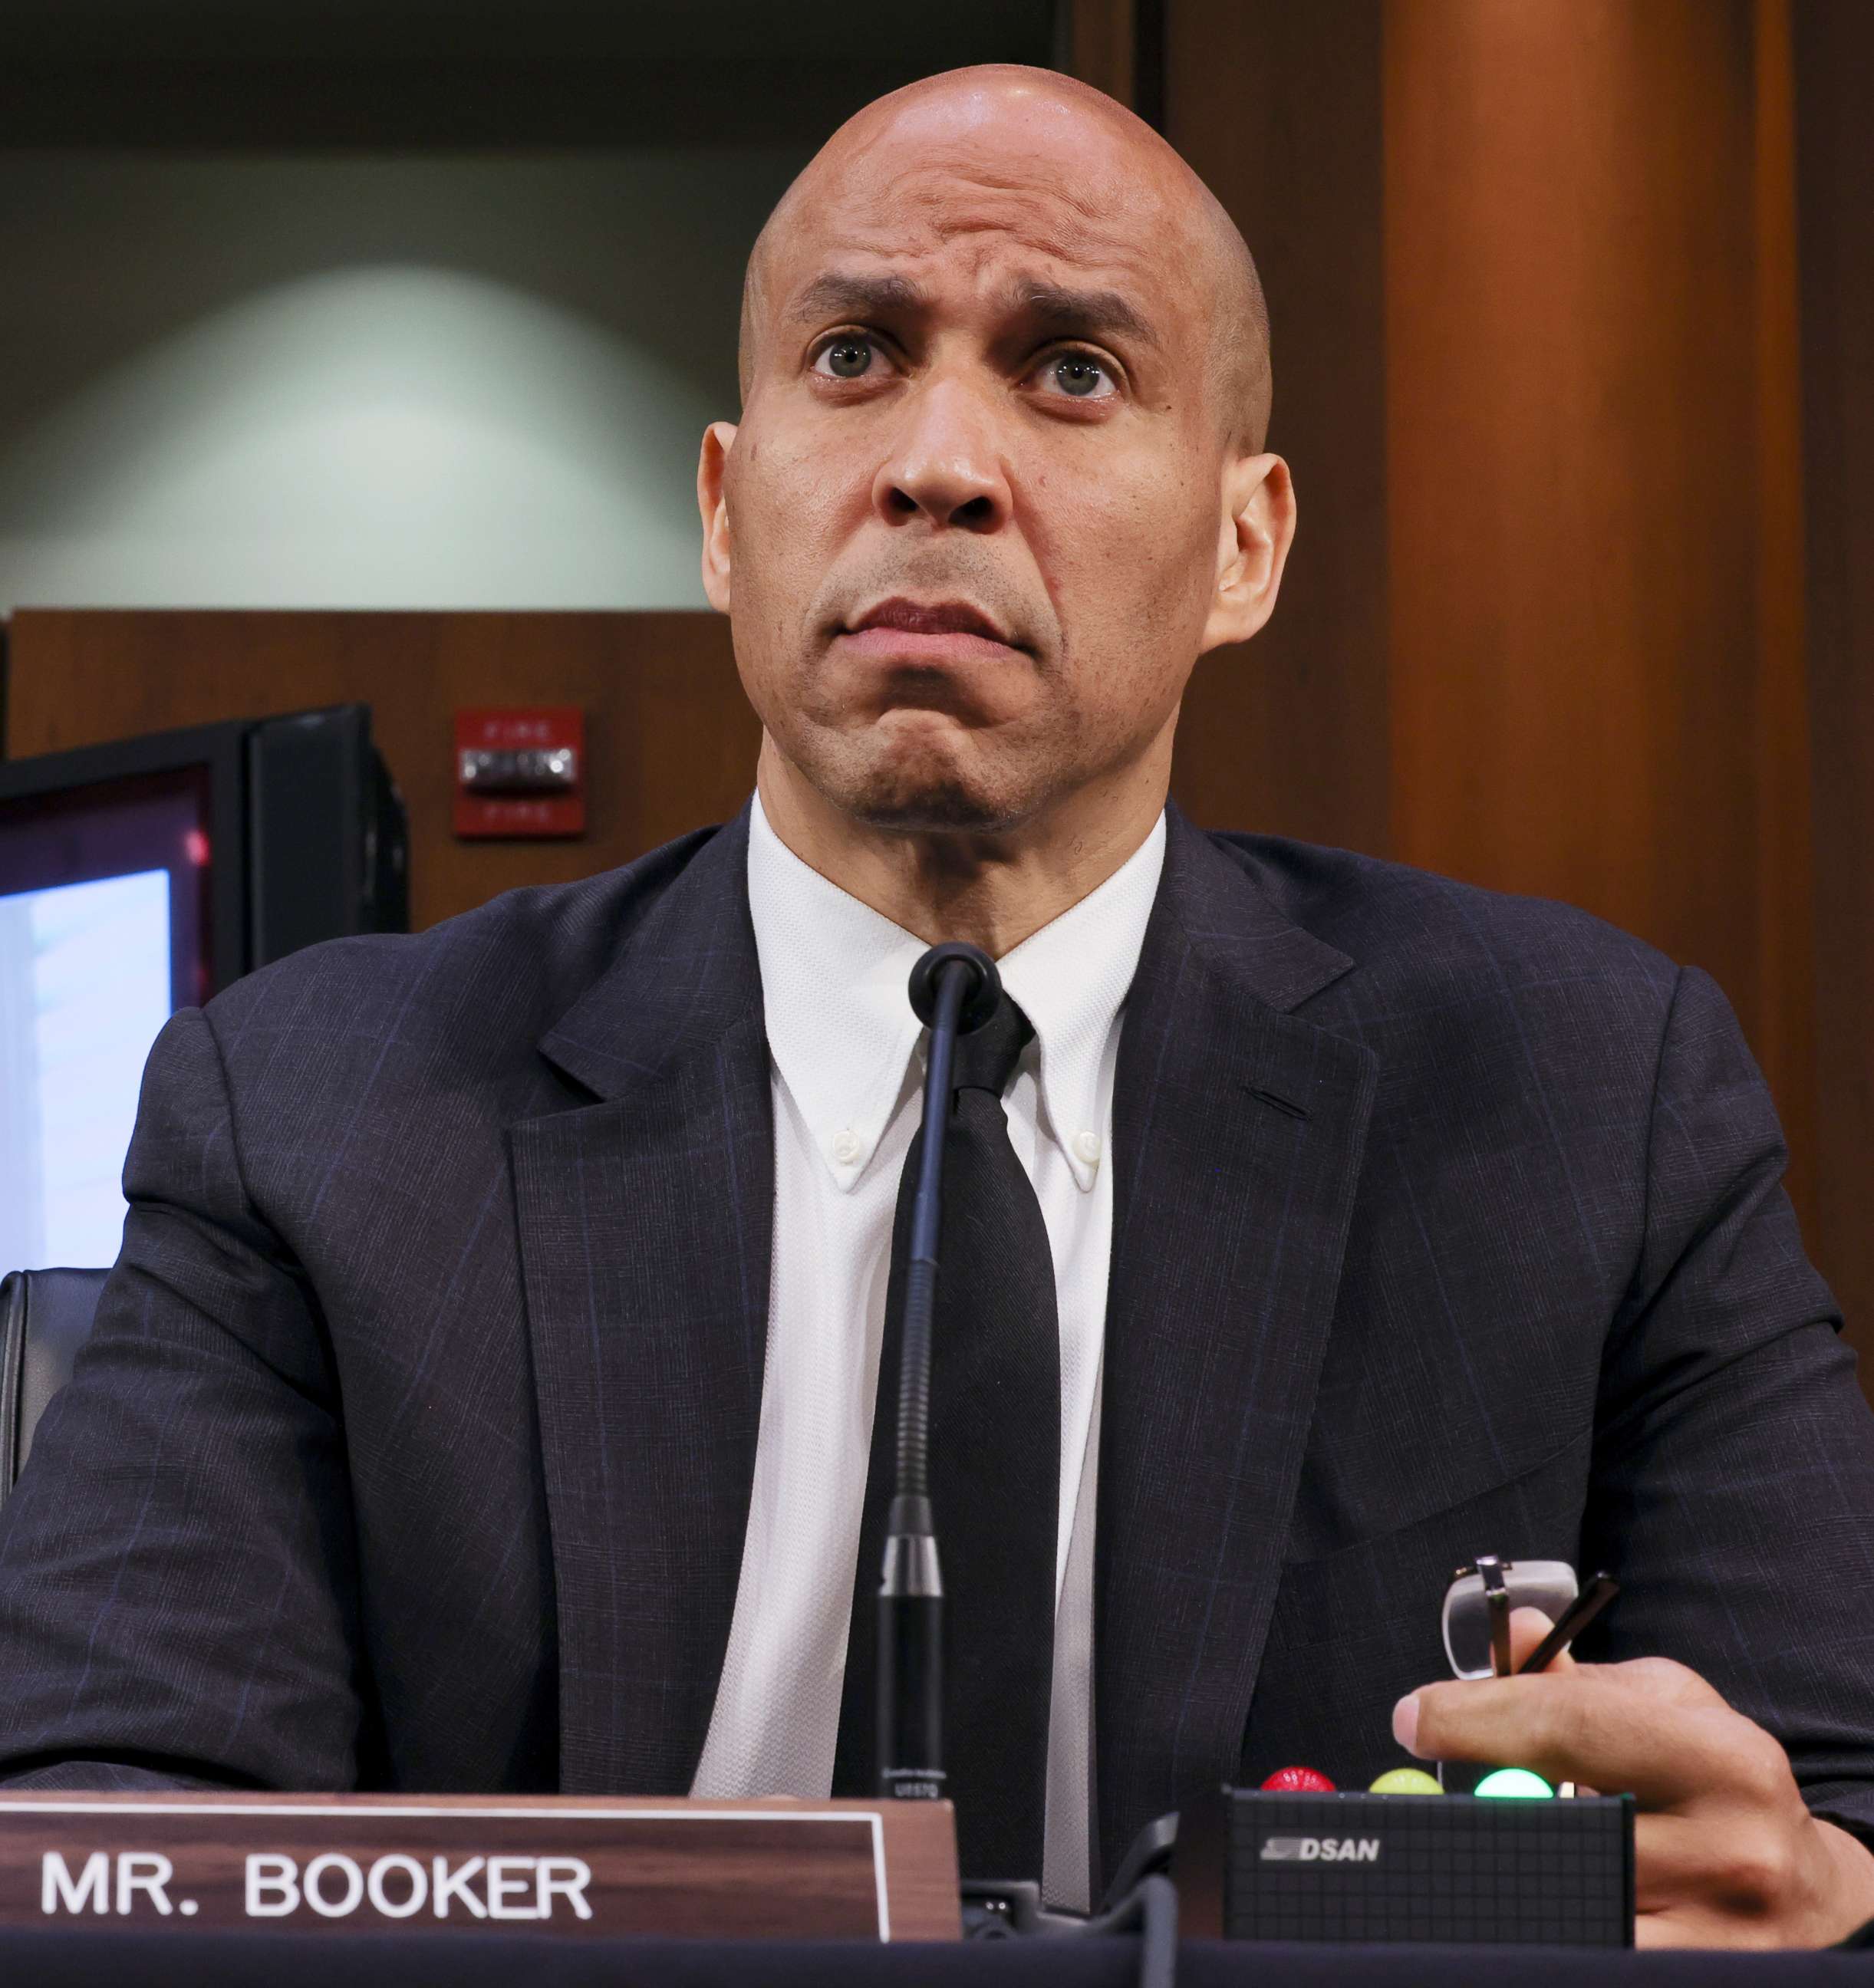 PHOTO: Sen. Cory Booker attends a Senate Judiciary Committee hearing on Capitol Hill in Washington, April 20, 2021.